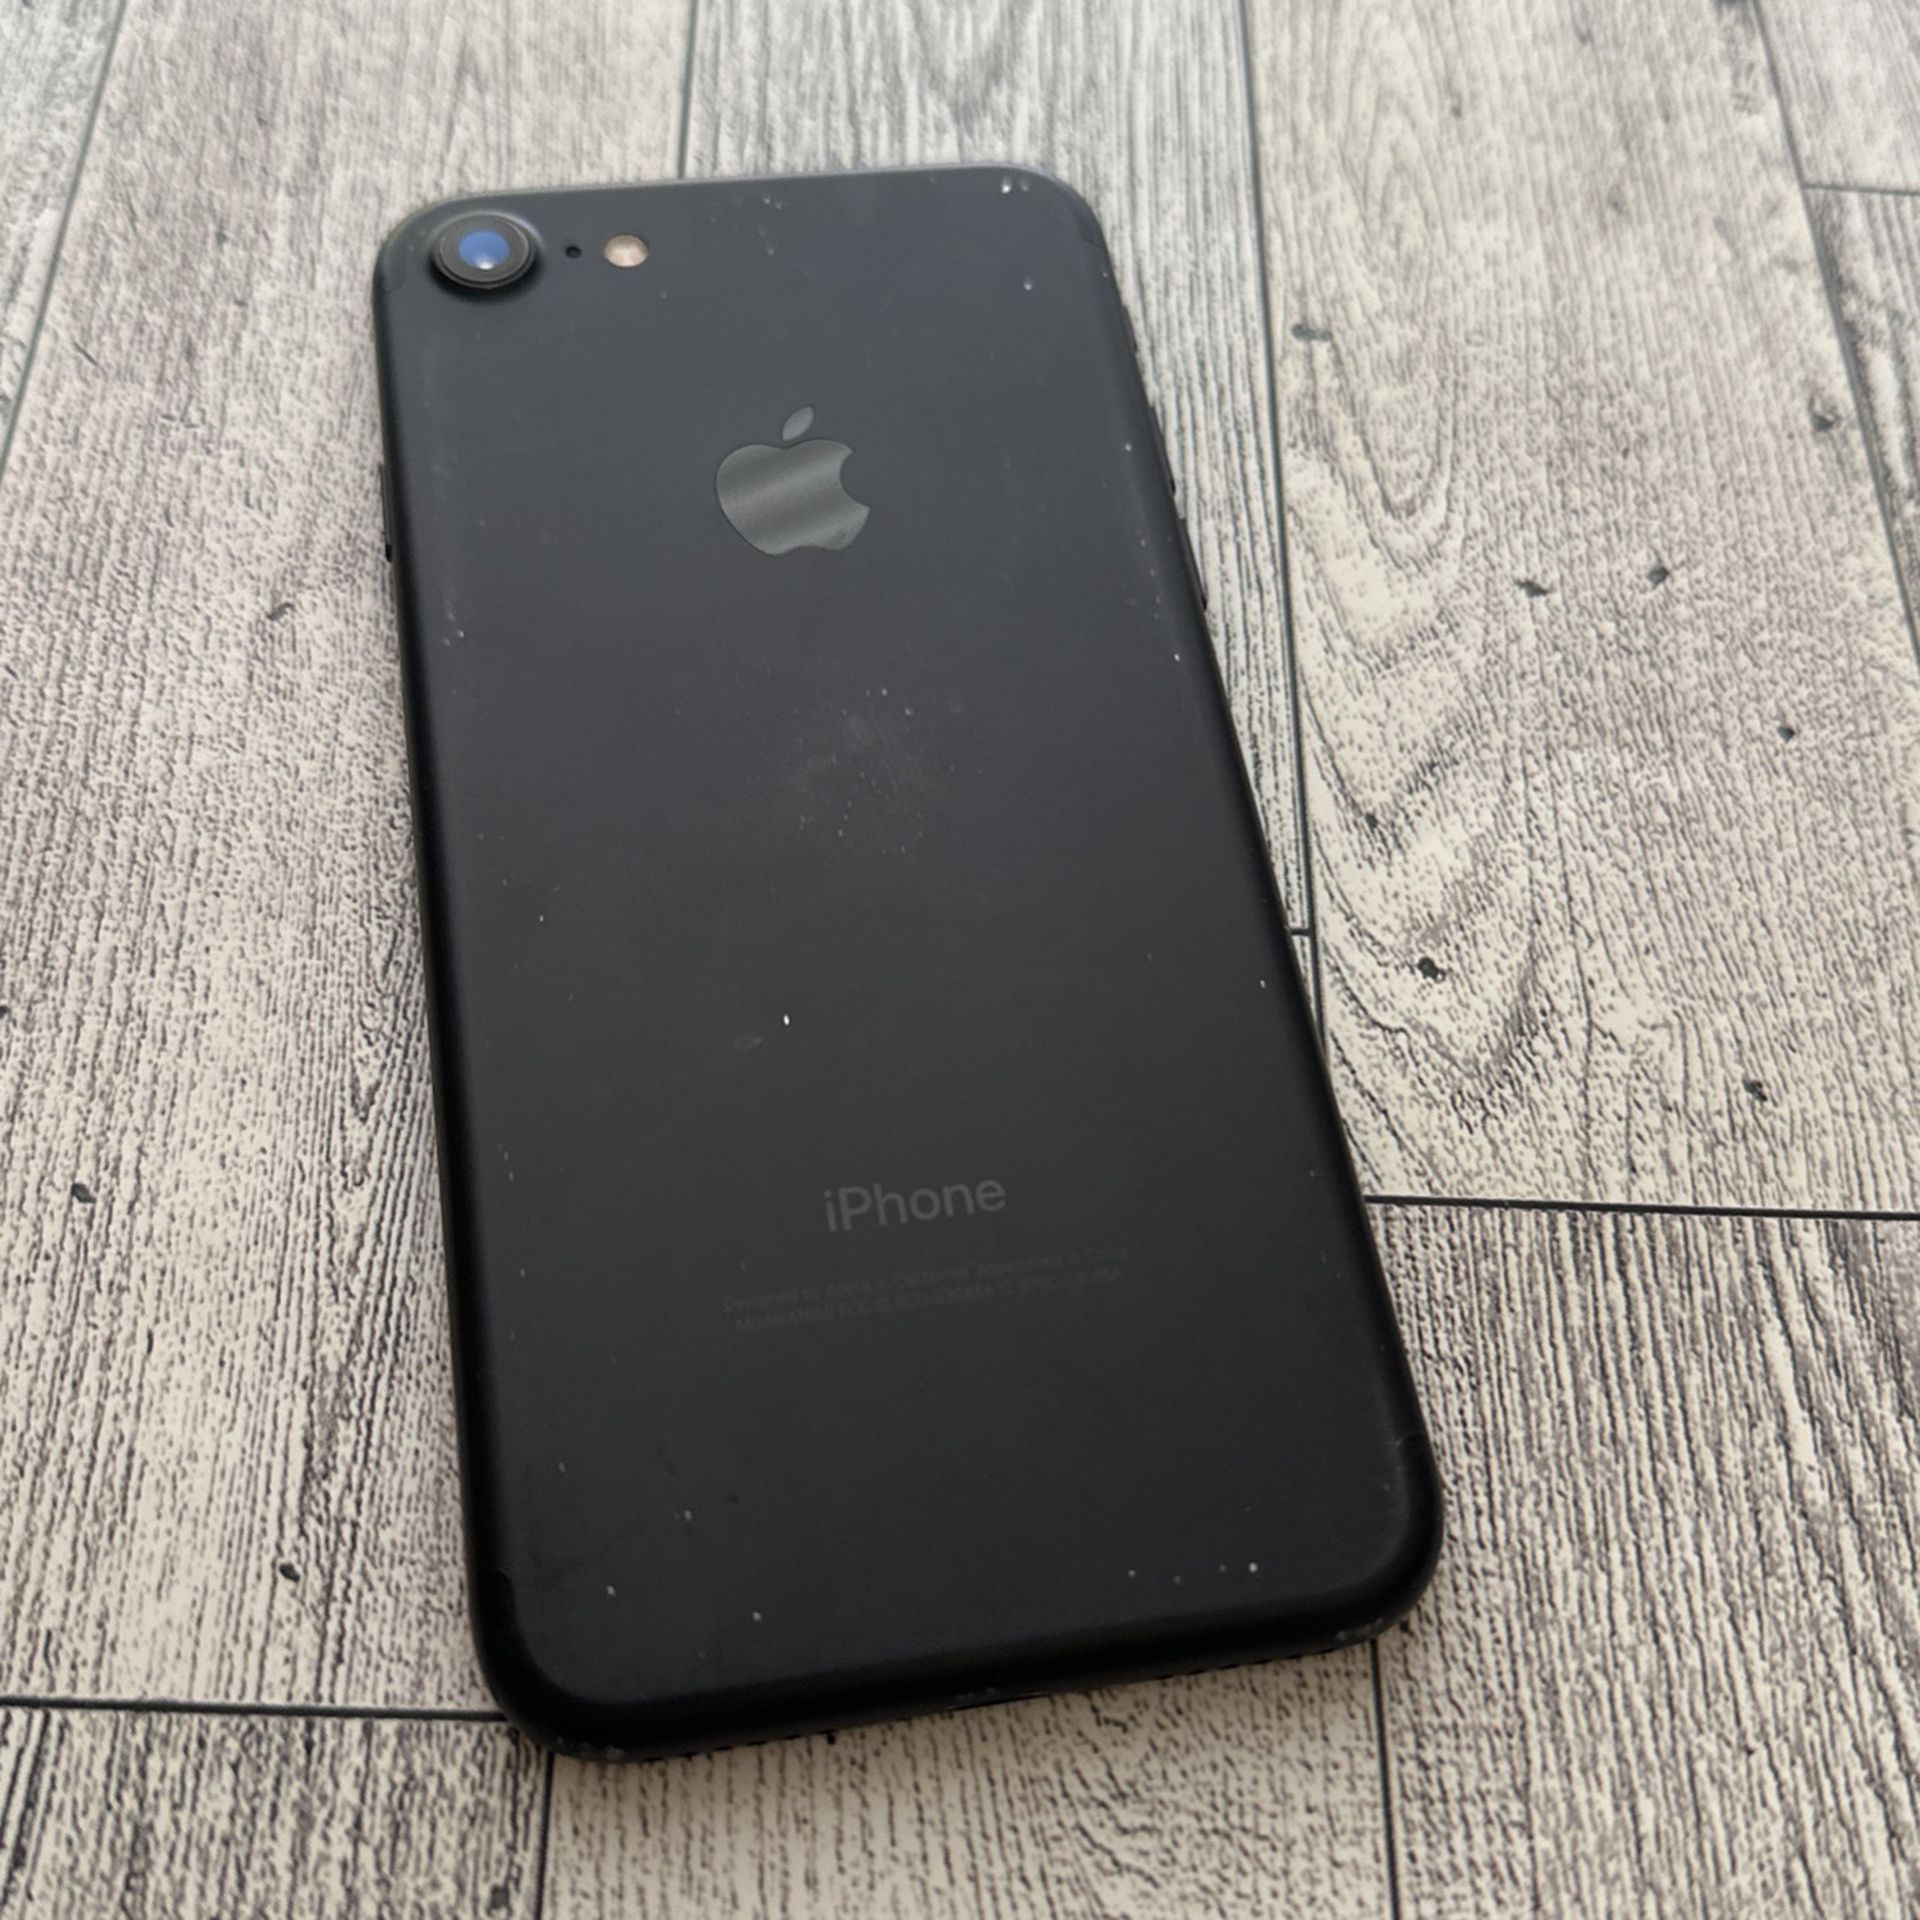   📲 iPhone 7 (32GB)  UNLOCKED 🌎 DESBLOQUEADO For All Carriers 